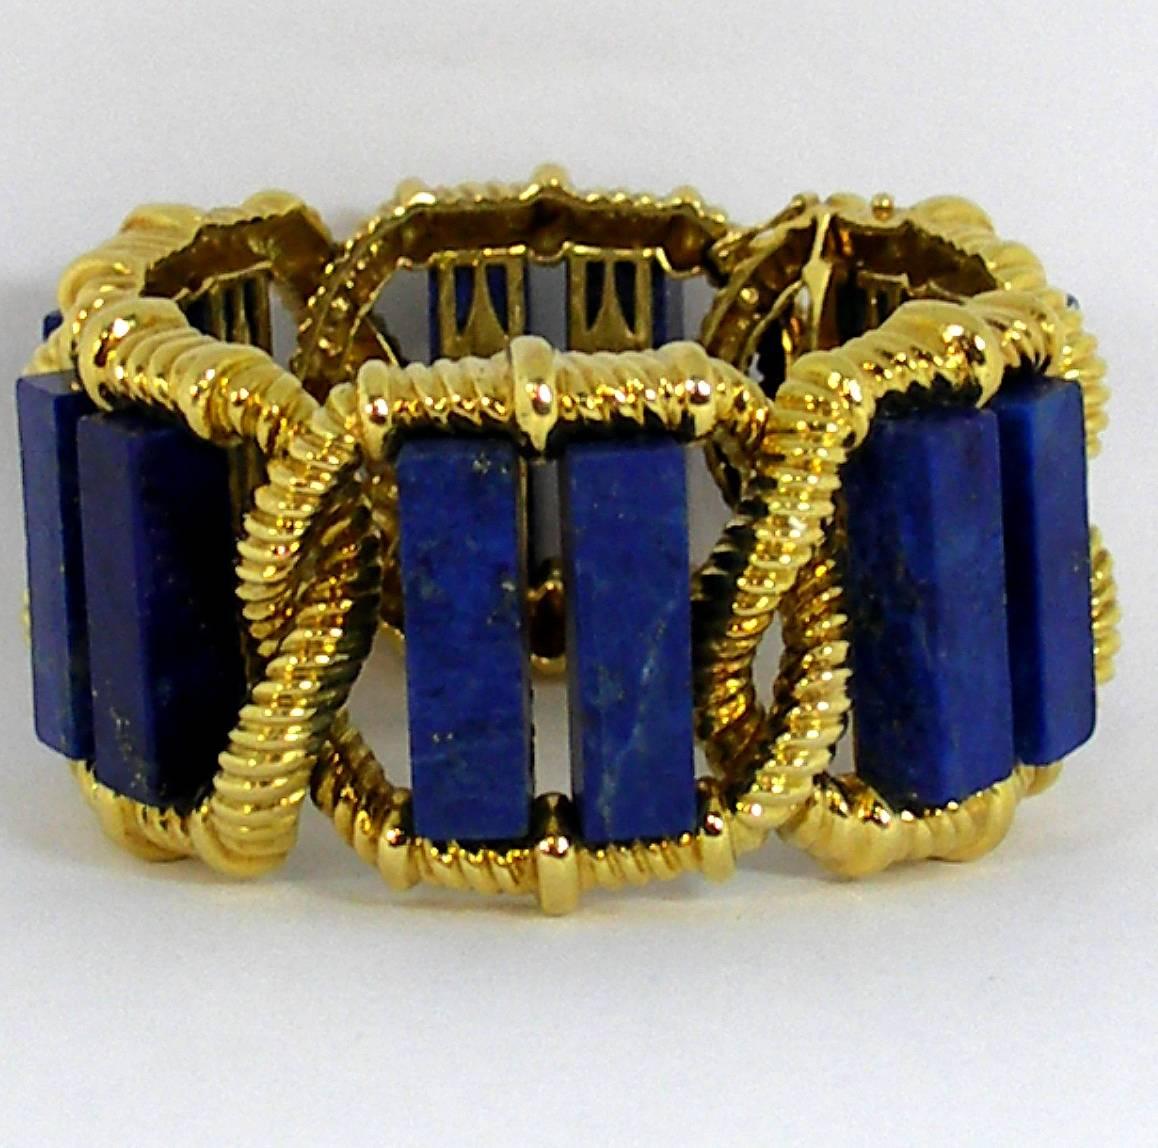 An 18K yellow gold bracelet by Wander of France, measuring 1 3/8 inches wide, and embellished with 12 slabs of Lapis Lazuli. Each link is comprised of a twisted rope design with two columns of Lapis.